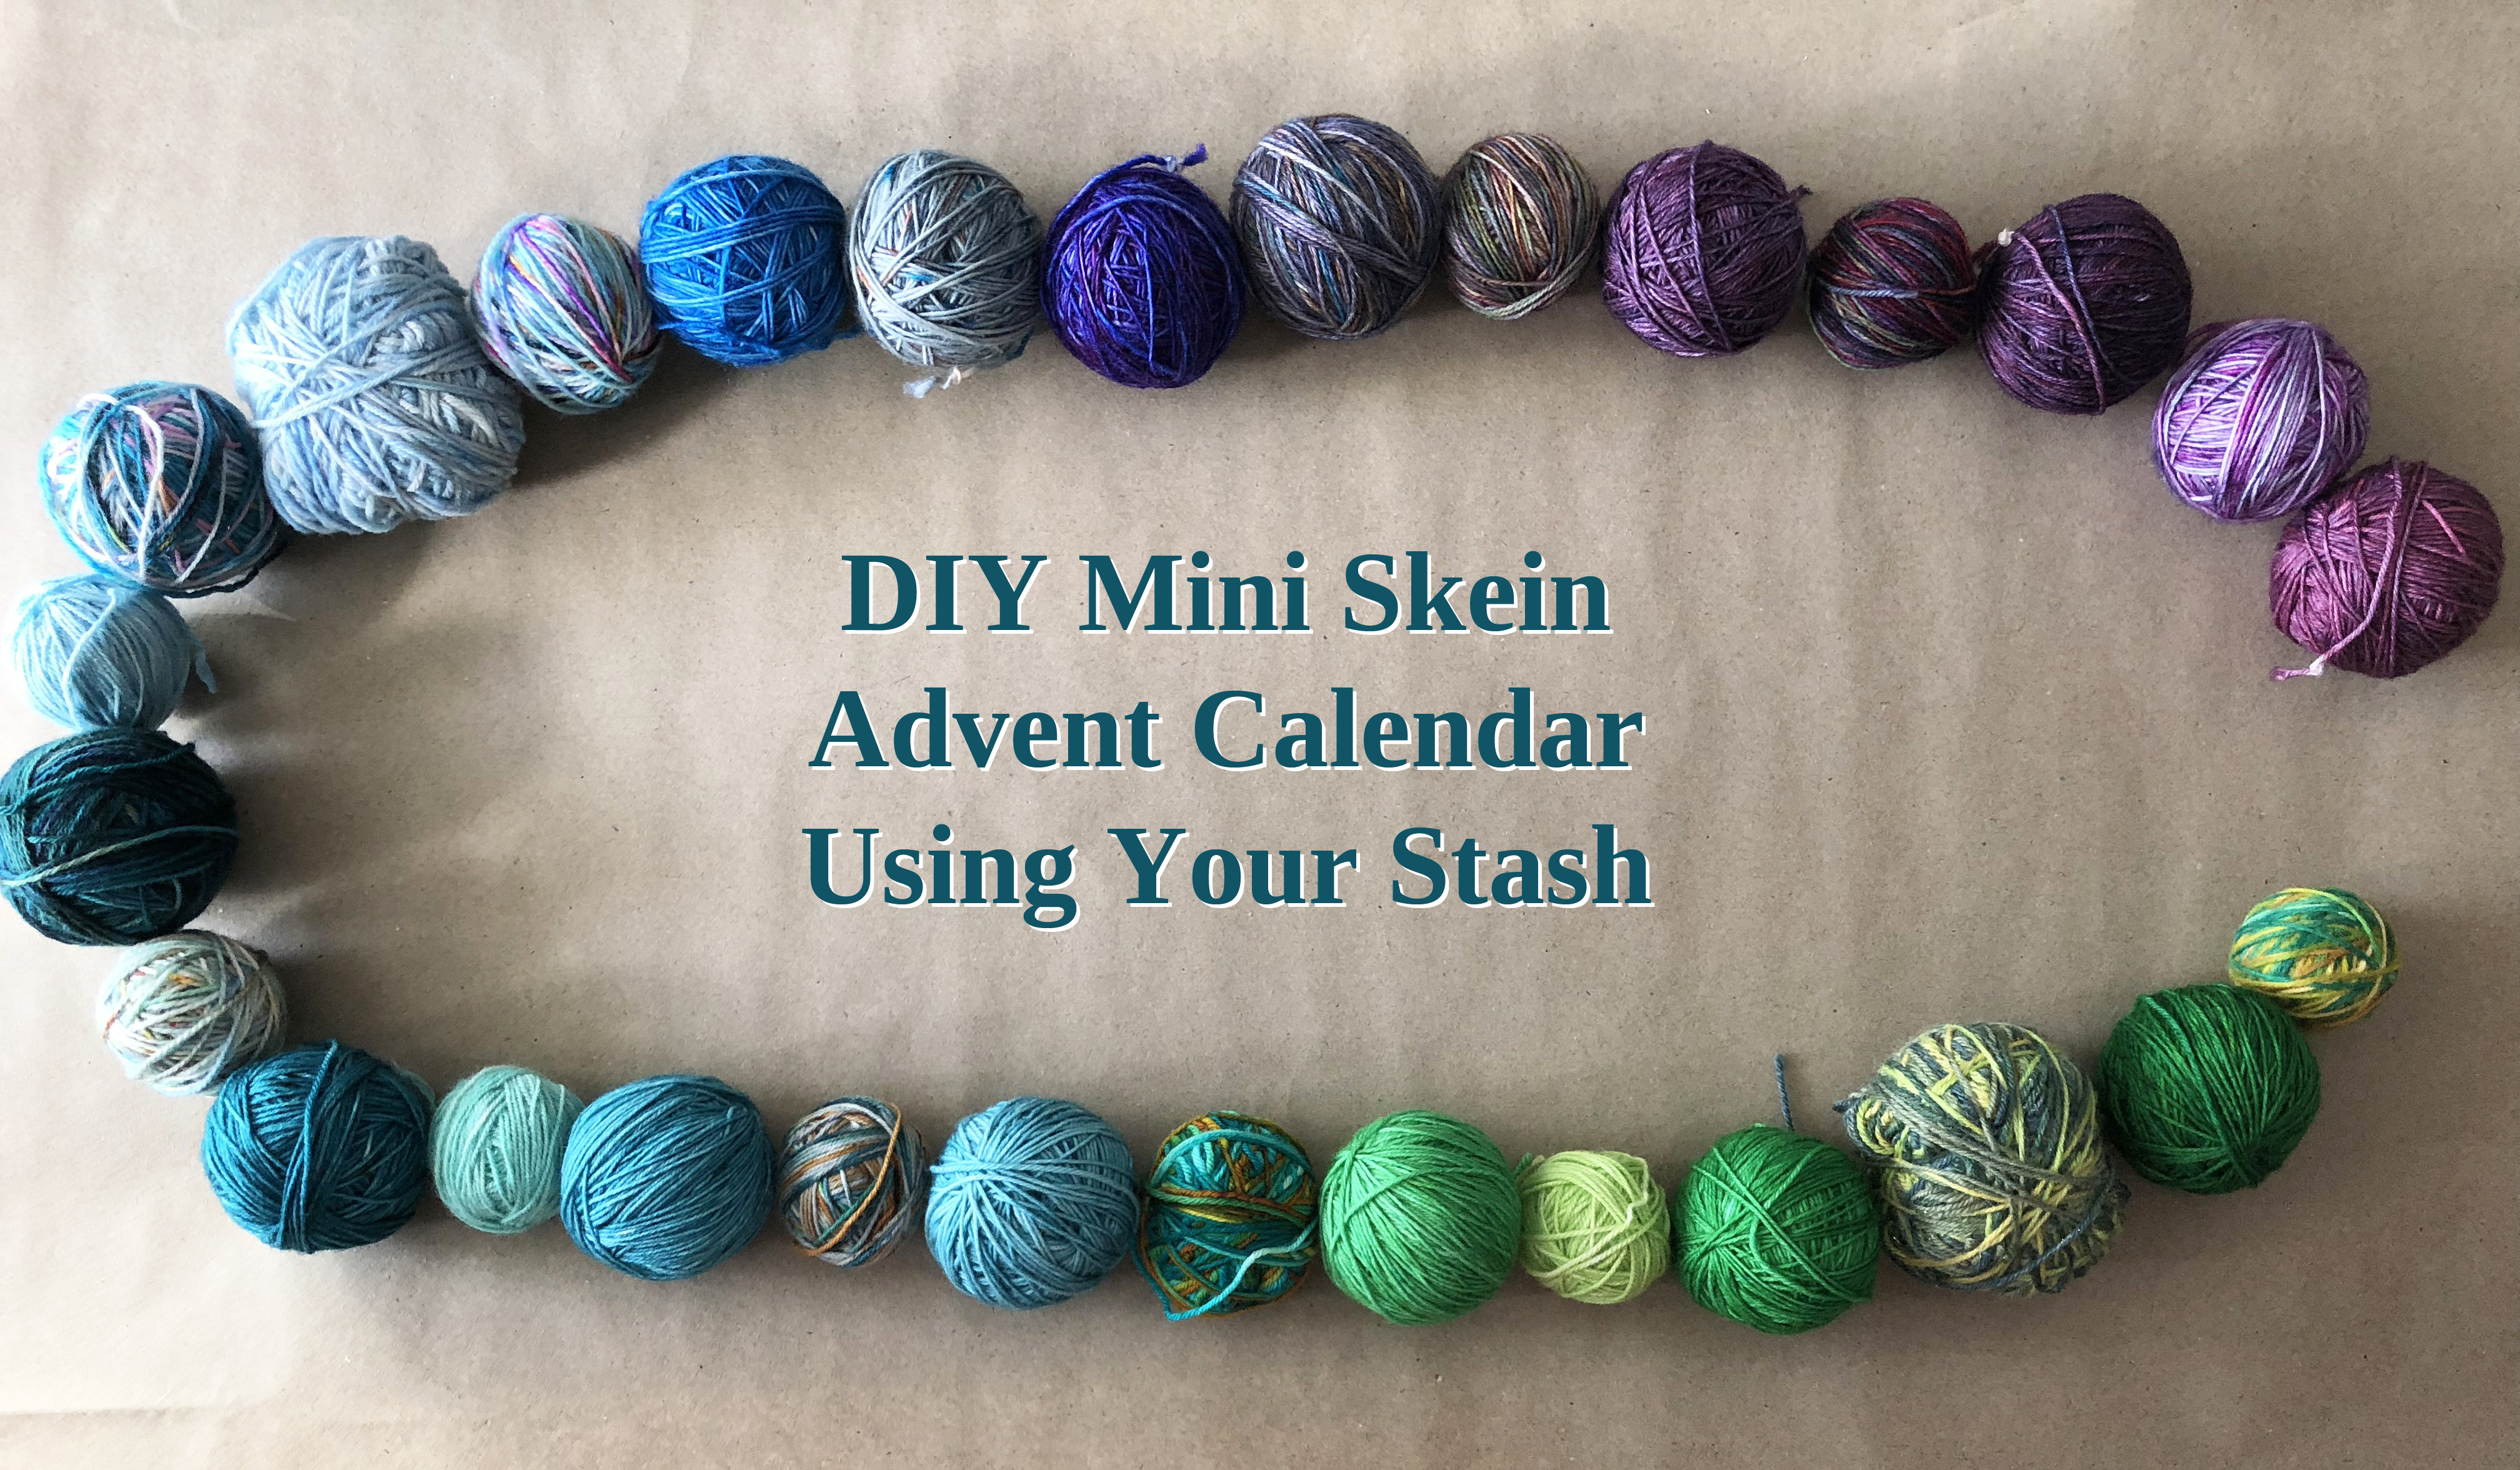 How to Create Your Own Yarn Advent Calendar with Leftover Sock Scraps